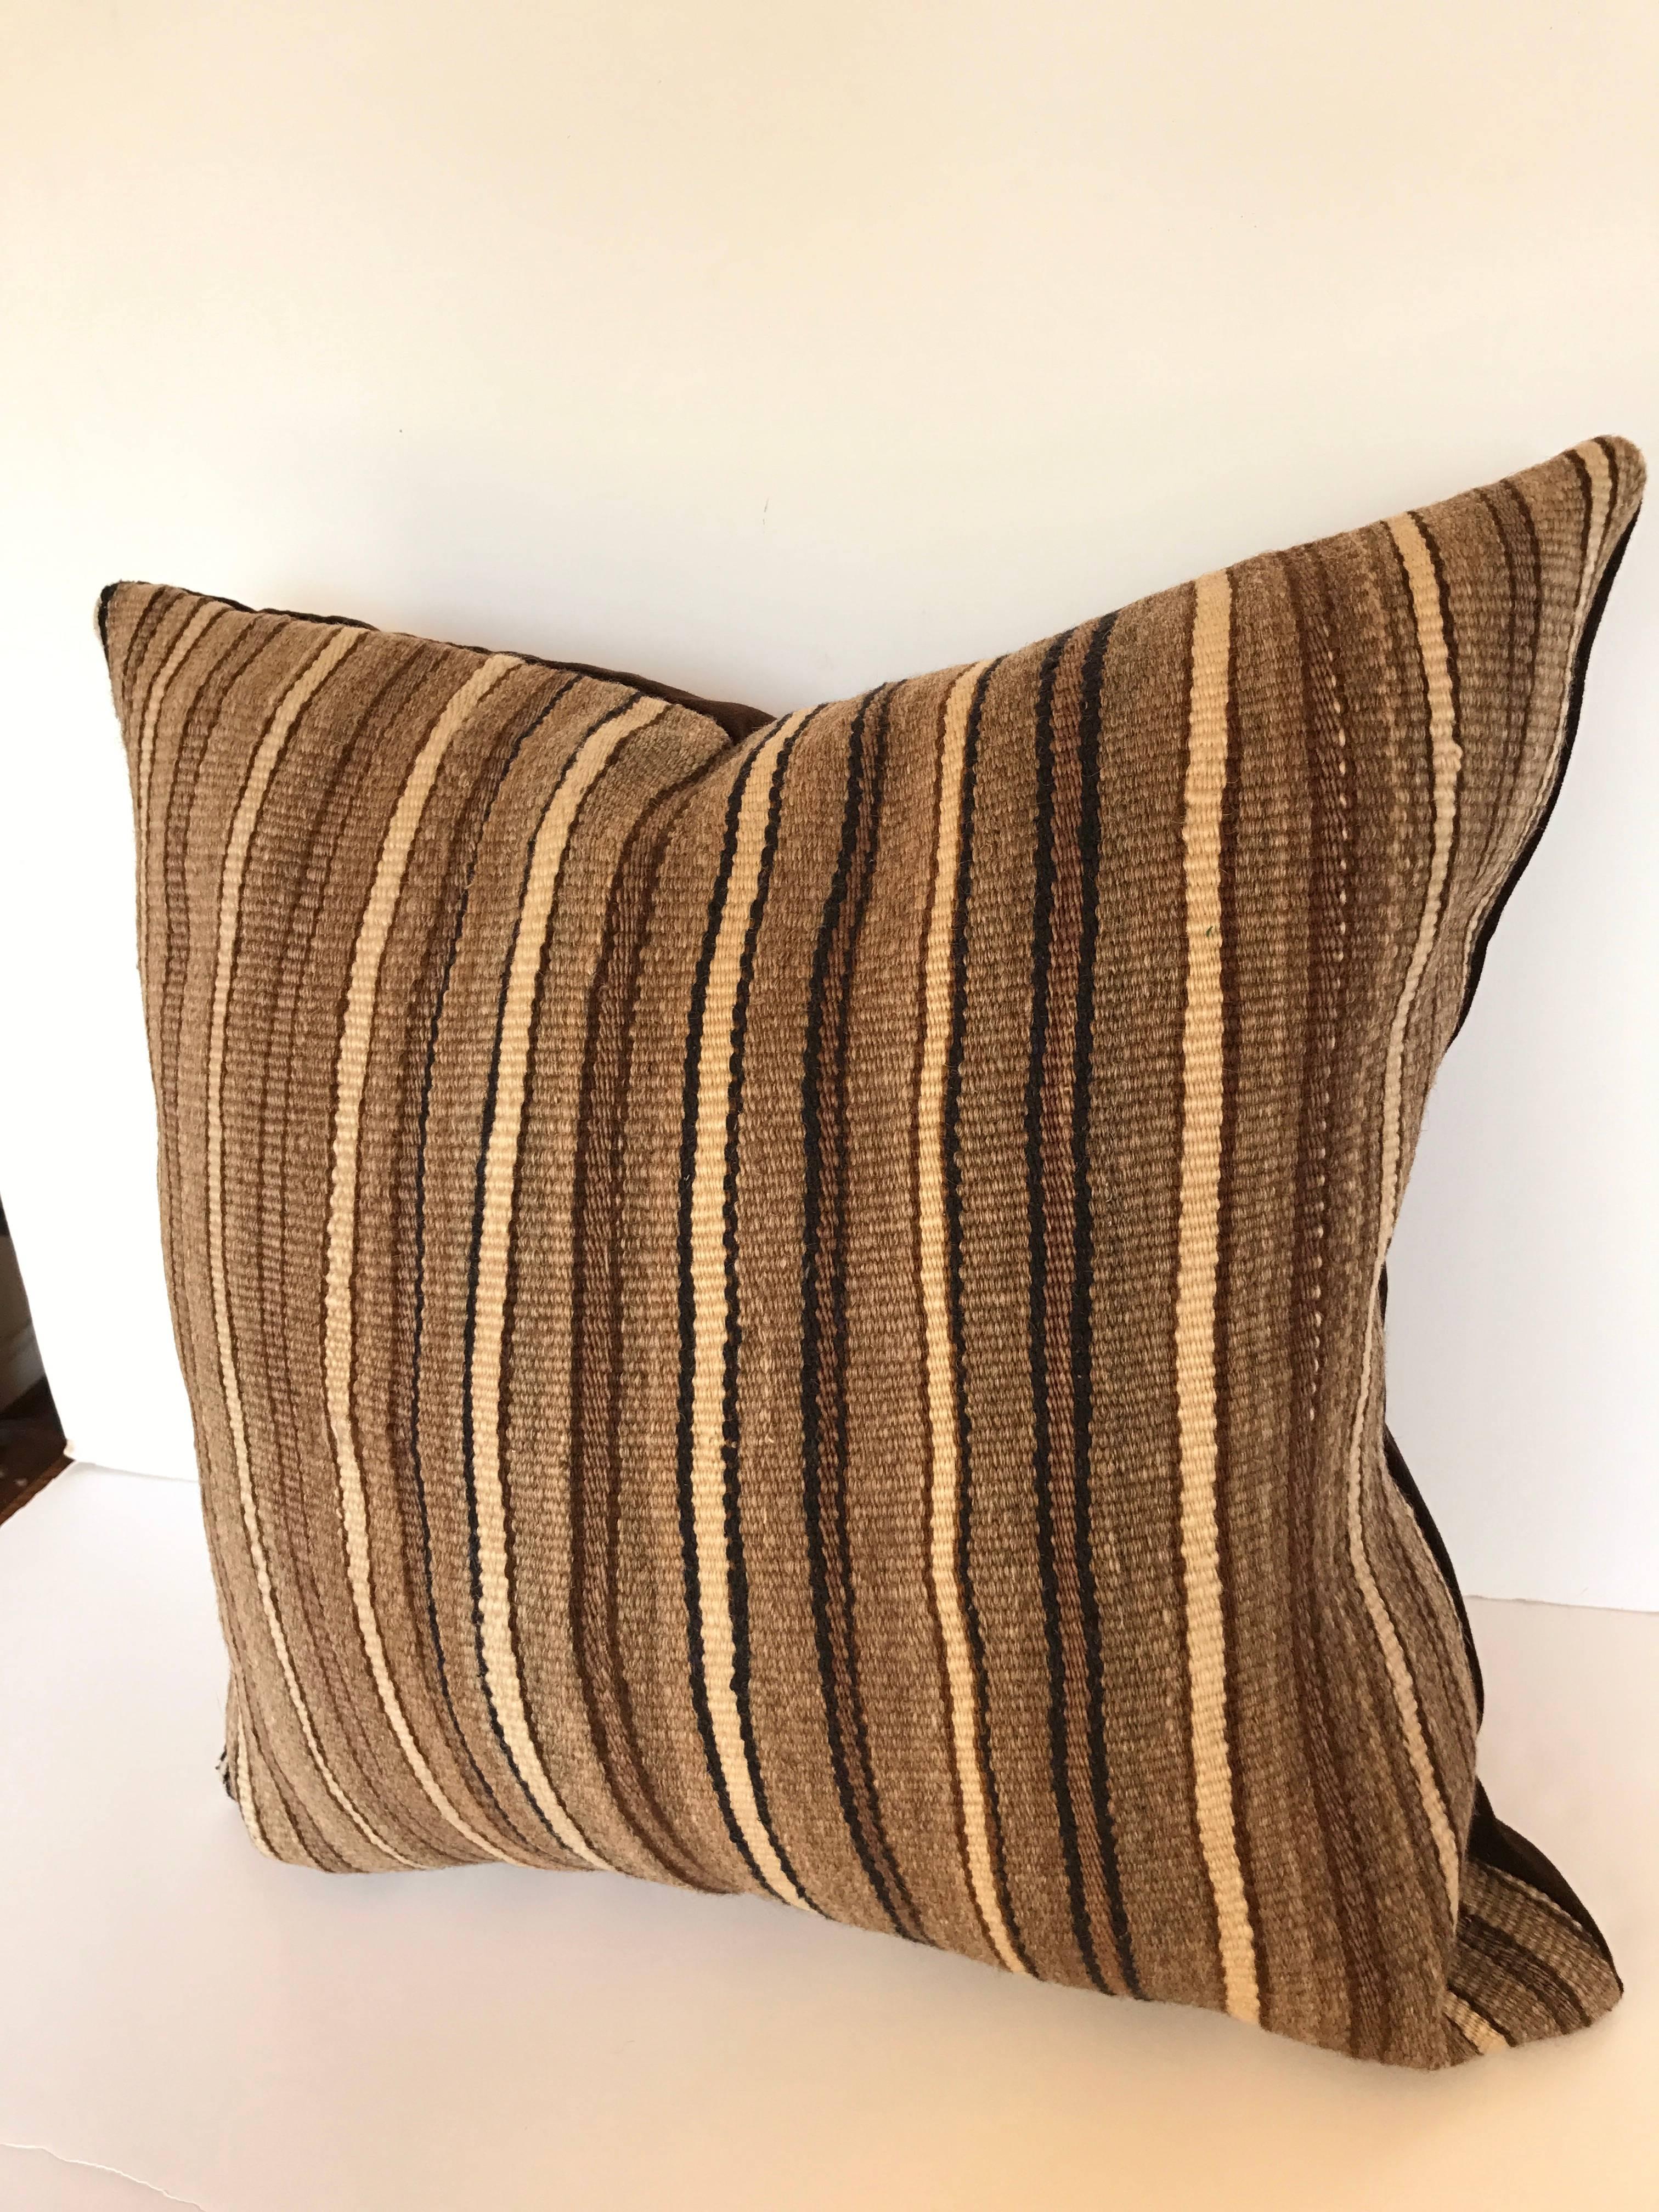 Custom pillow cut from a vintage hand-loomed wool Moroccan Berber rug from the Atlas Mountains. Woo is soft and lustrous with all natural dyes in browns, cream and navy stripes. Pillow is backed in dark brown velvet, filled with an insert of 50/50